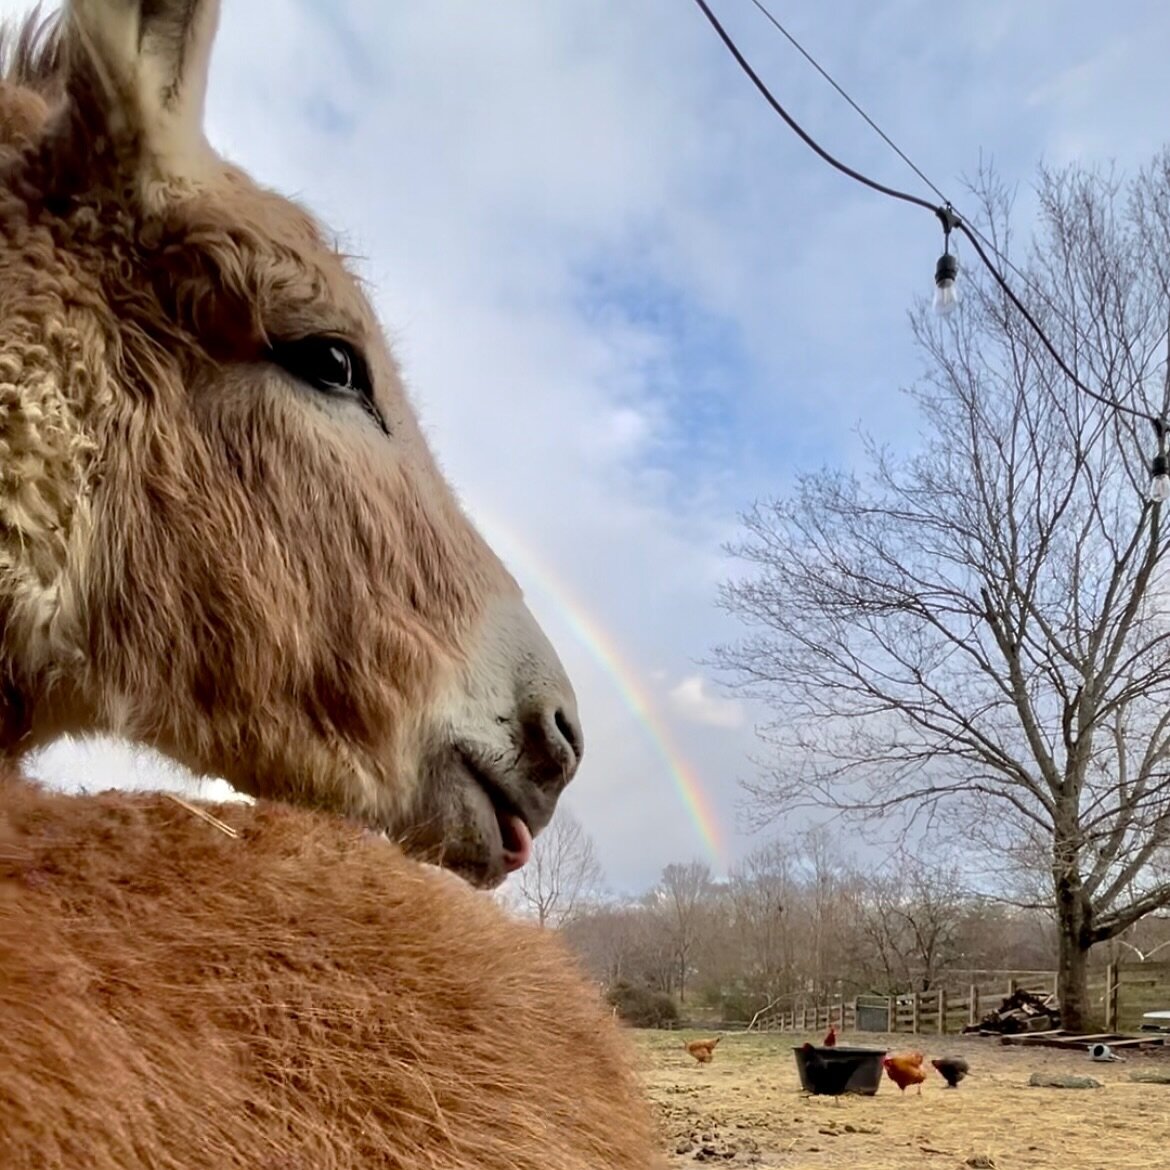 About to head into hibernation mode with 4 days of temps below freezing. 🥶 Rosie snagged some little rays of sunshine quick between clouds to warm your hearts and homes until we come back out of our lil barn cave. 🦄🌈